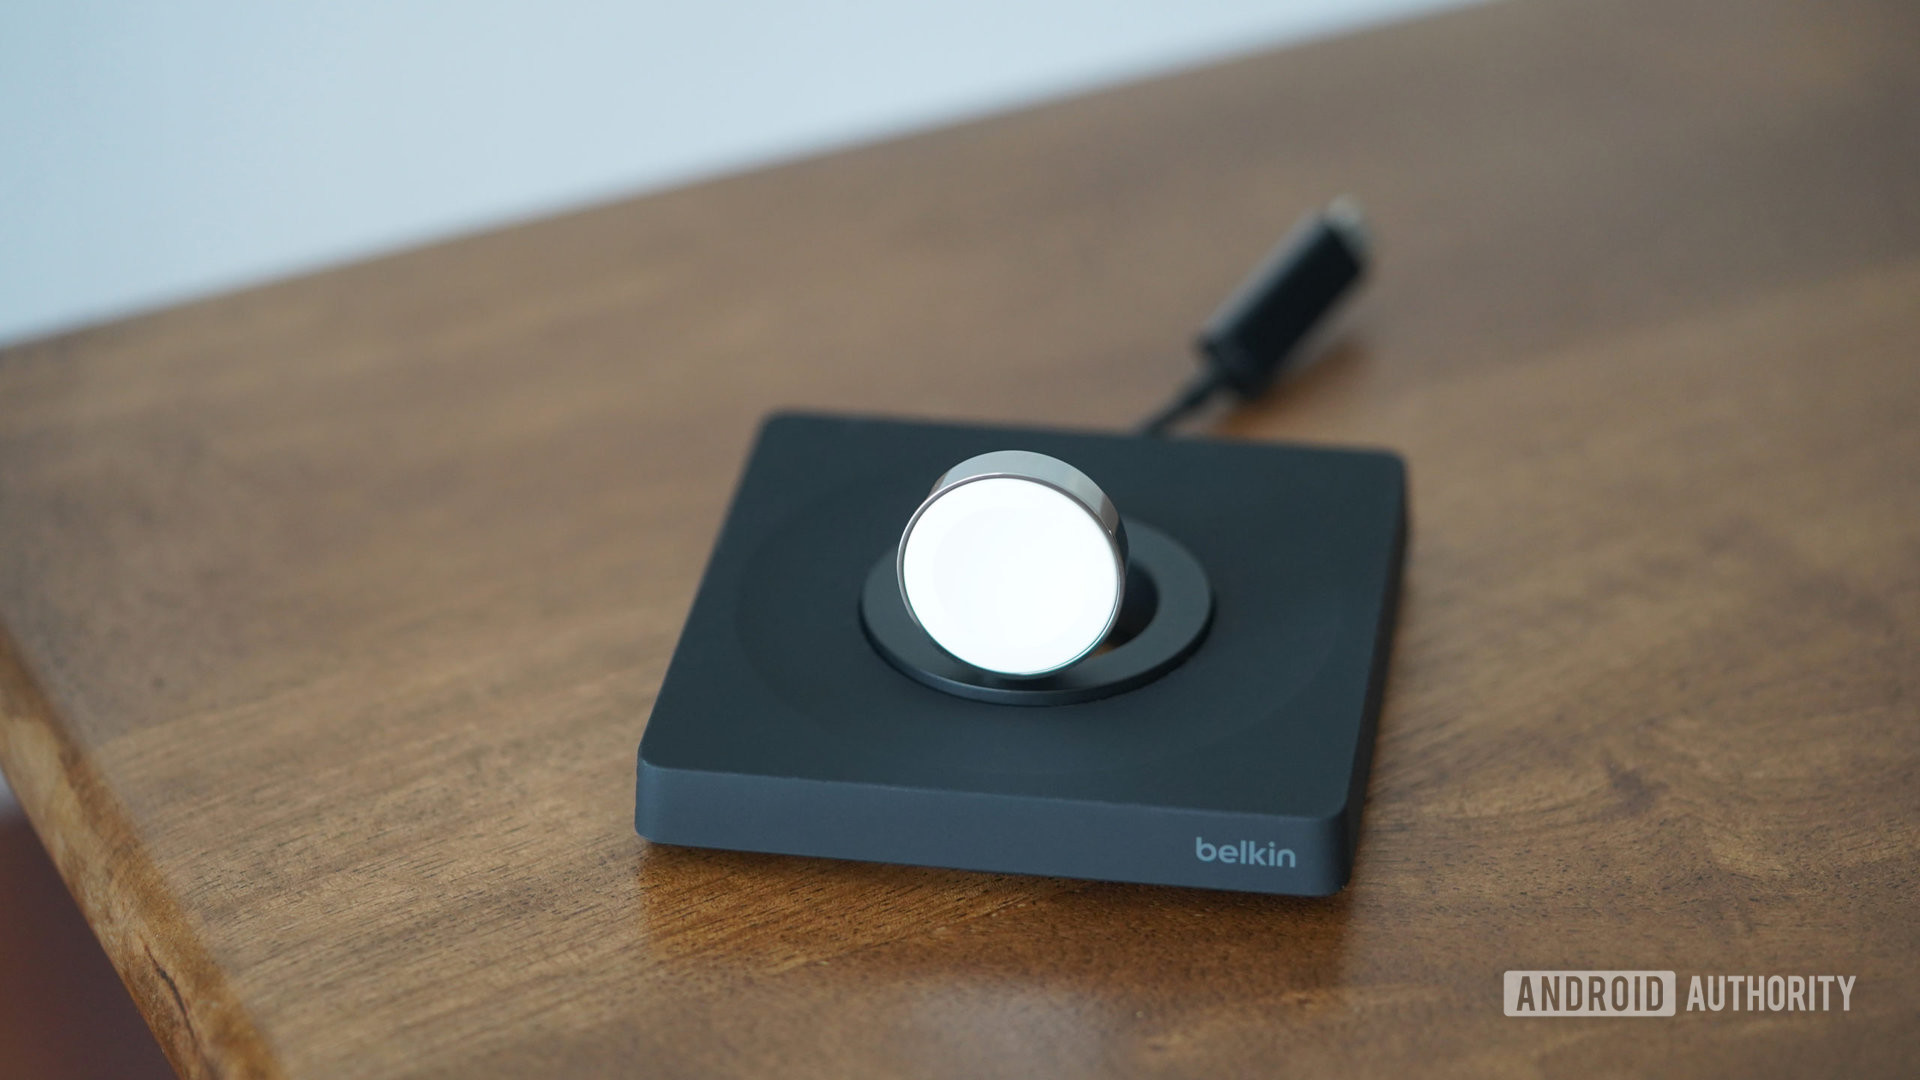 The adjustable charging puck allows your wearable to lay flat or charge in Nighstand mode.